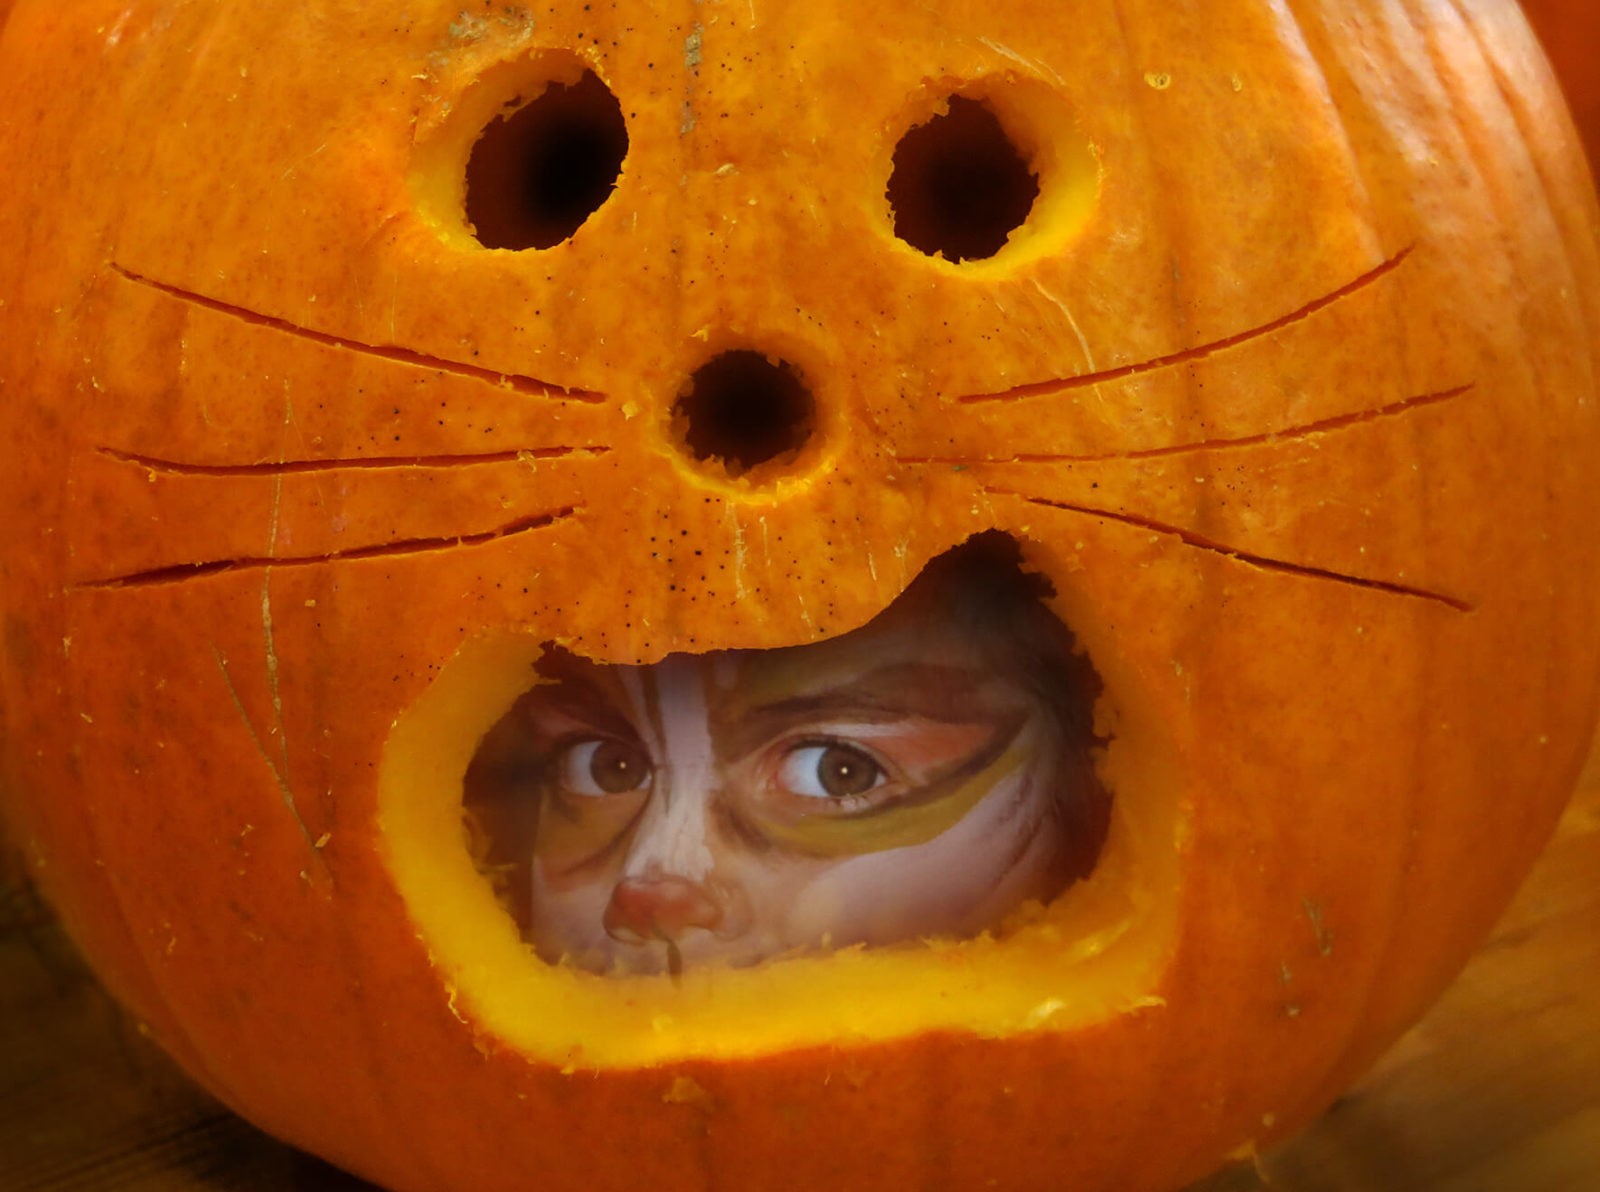 Robin Botie of Ithaca, New York, Photoshops her daughter's face painted as a cat, into the mouth of a carved pumpkin.